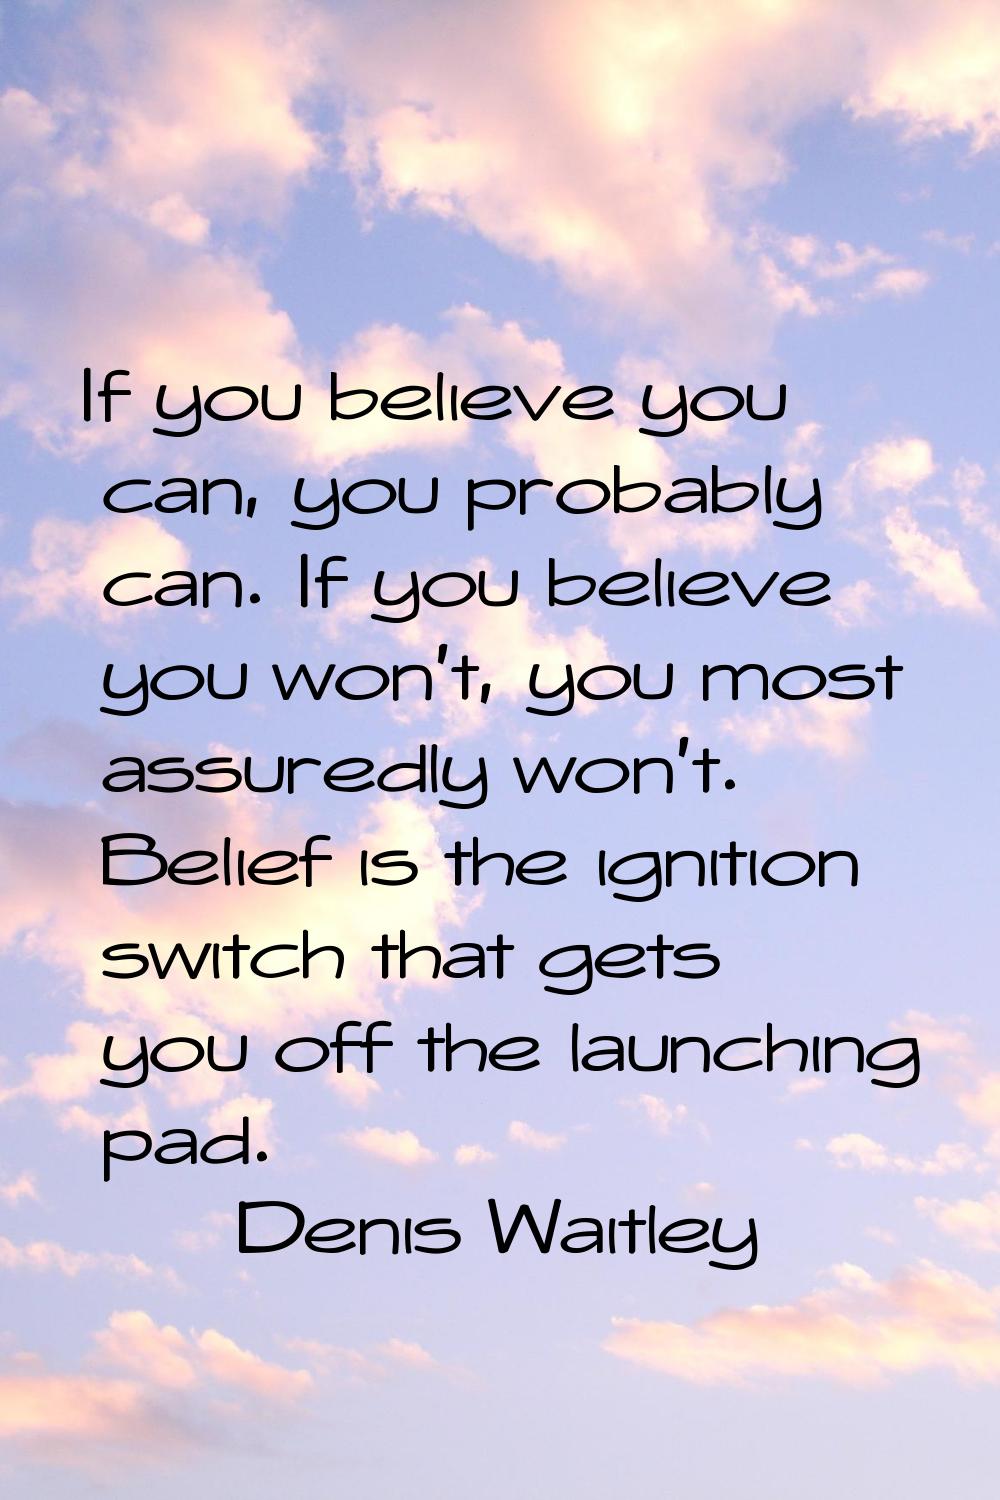 If you believe you can, you probably can. If you believe you won't, you most assuredly won't. Belie